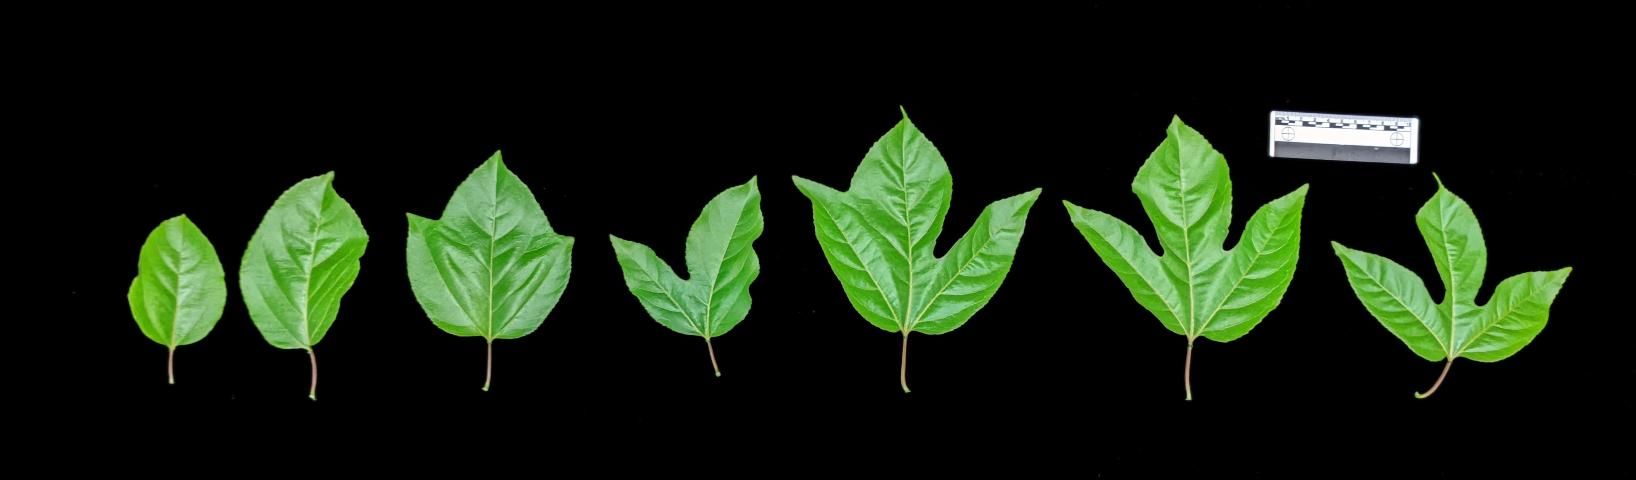 Figure 4. Leaf heteroblasty in P. edulis from juvenile to adult. The transition of young, monolobed leaves on left to adult, trilobed leaves on right.